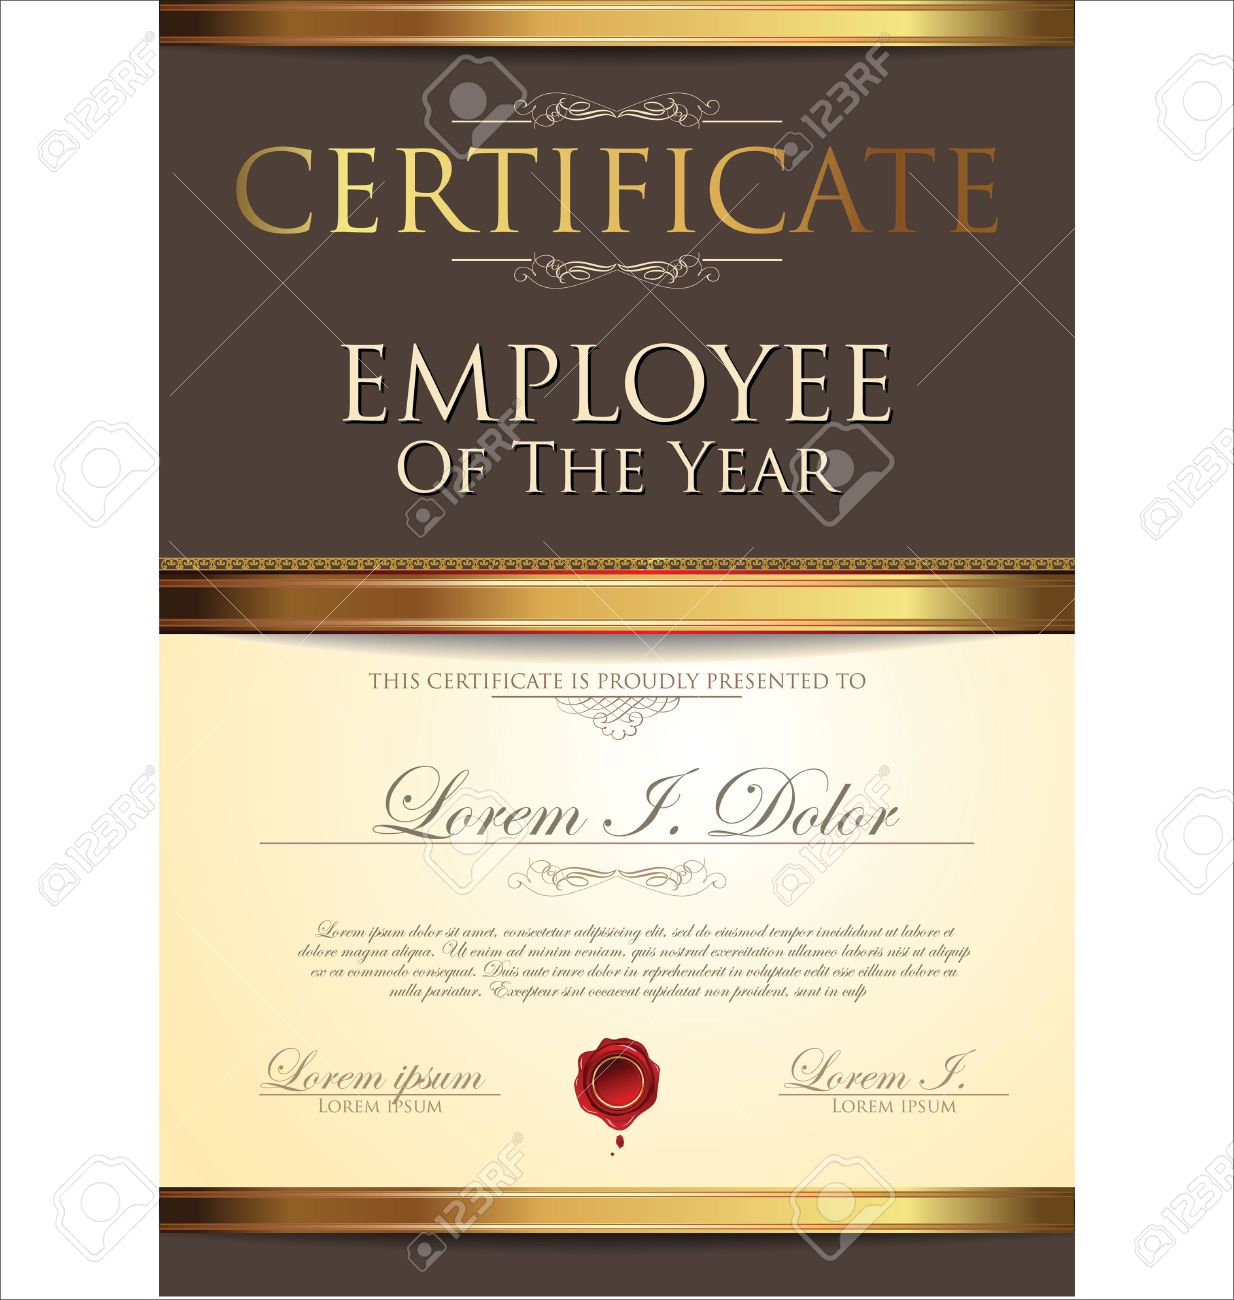 Certificate Template, Employee Of The Year For Manager Of The Month Certificate Template